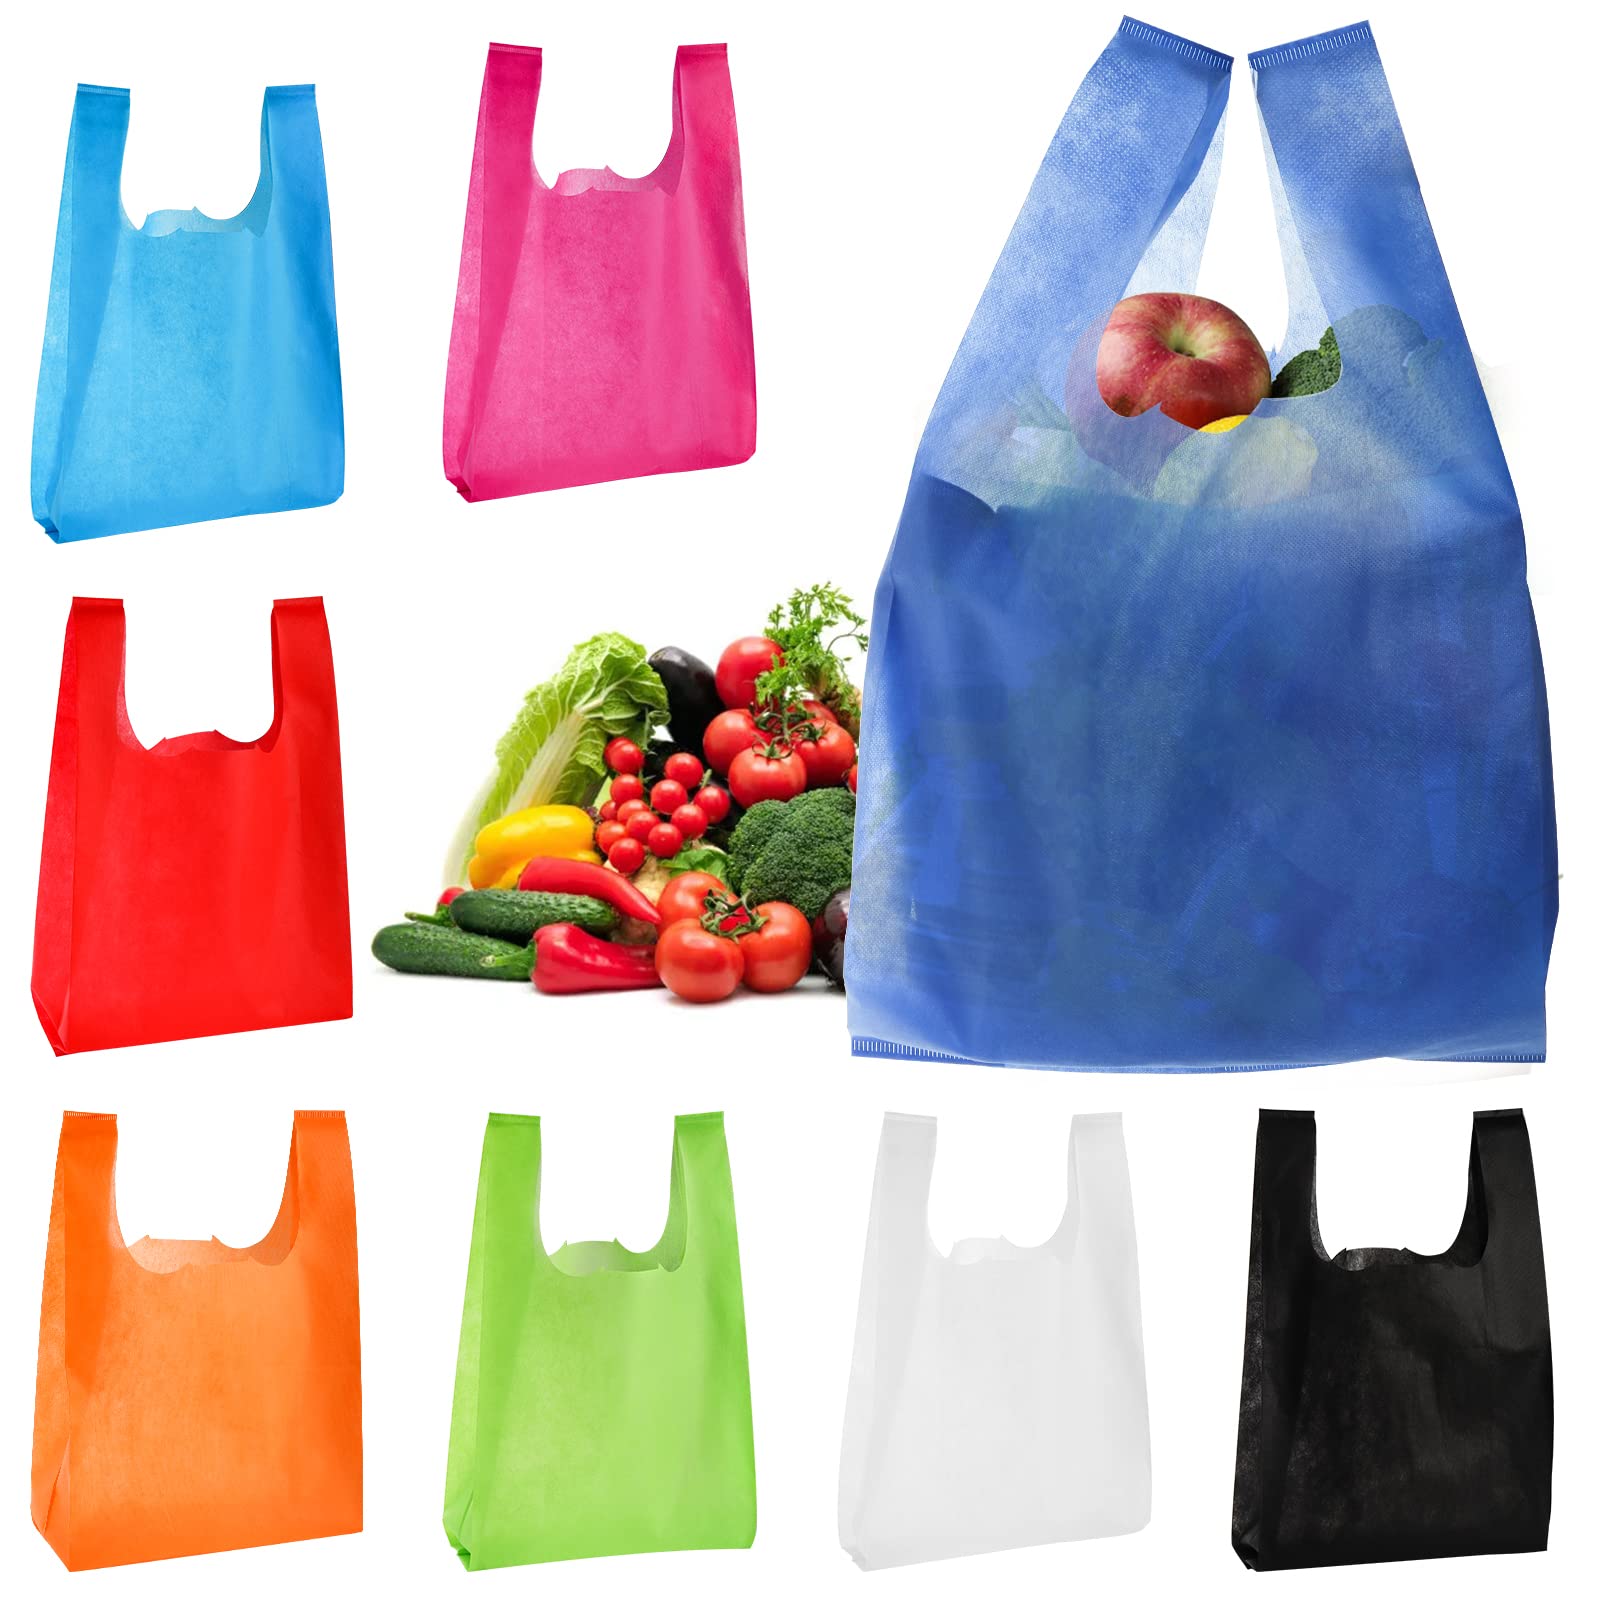 Okllen 40 Pack Reusable Fabric Grocery Bags, Heavy Duty Colorful Shopping Bags, Lightweight Tote Bags for Groceries, 8 Assorted Color